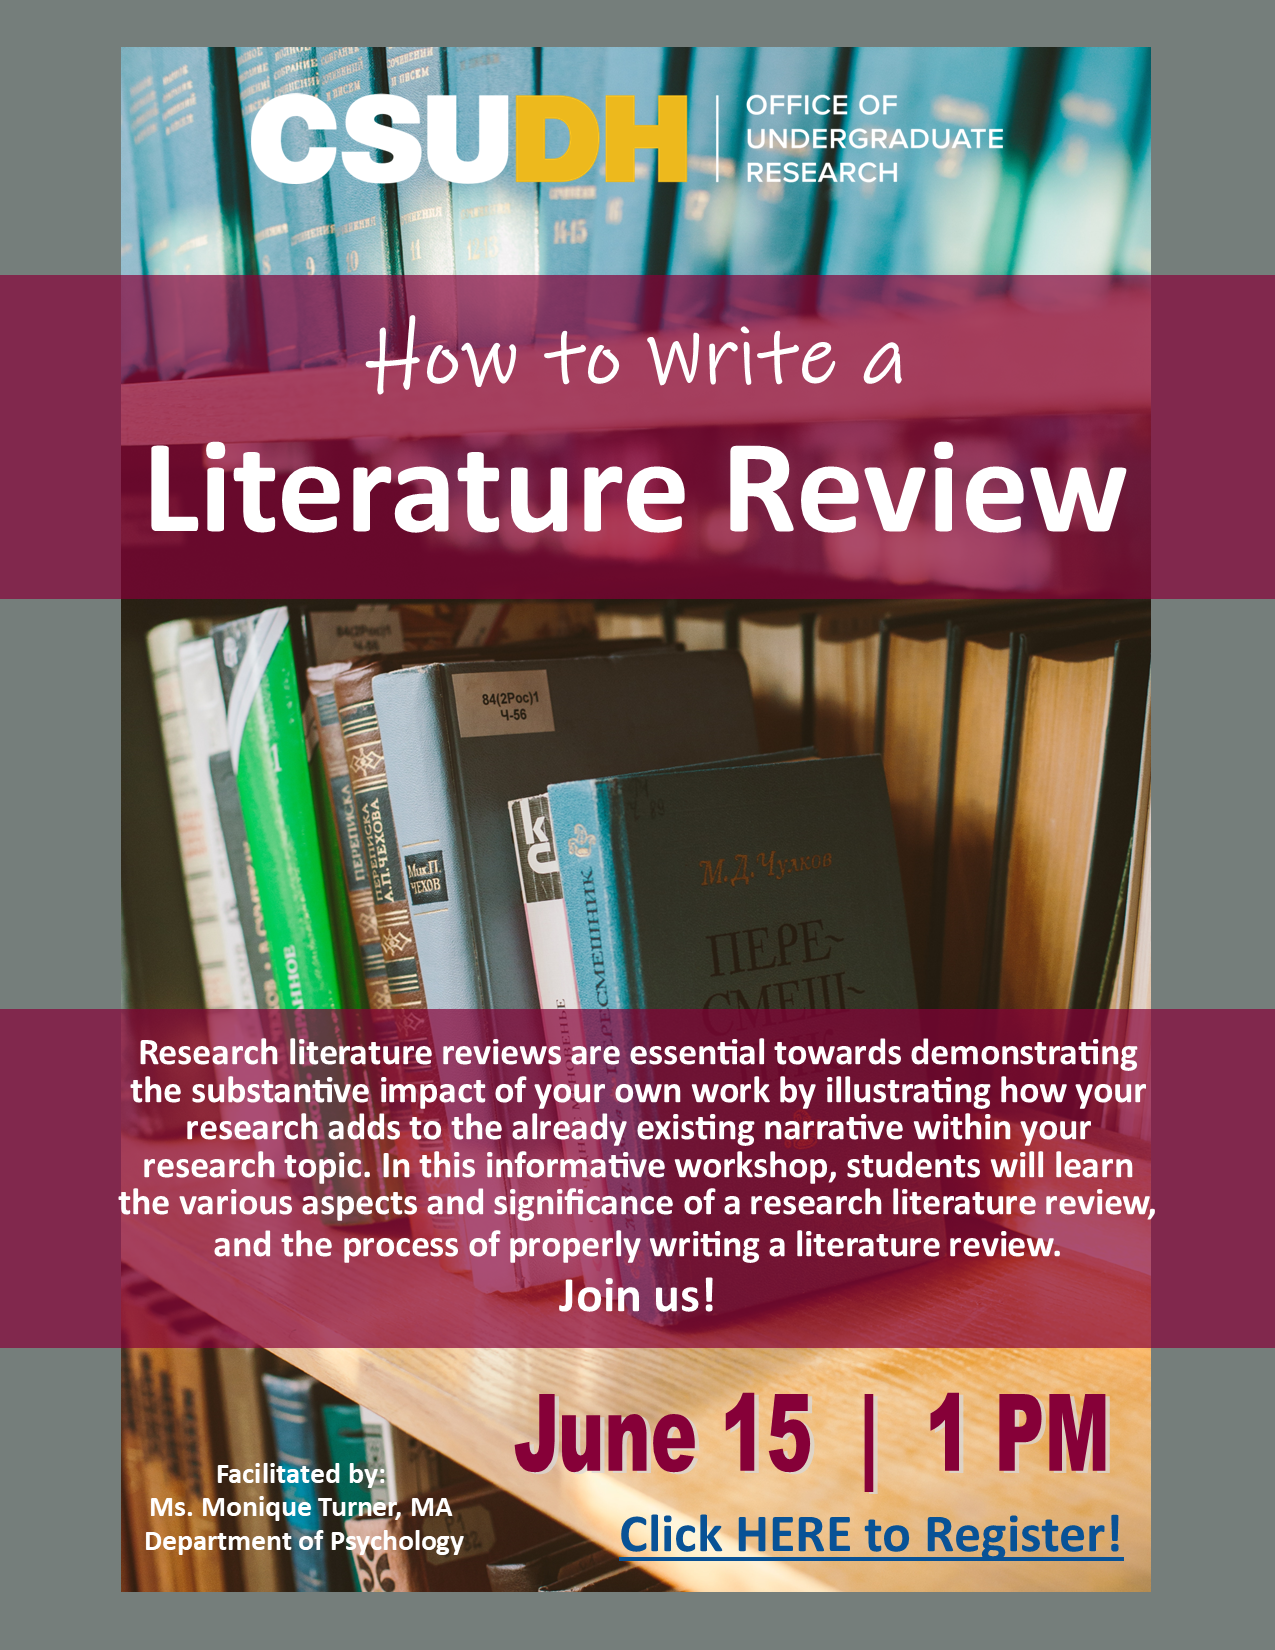 How to Write a Literature Review Workshop